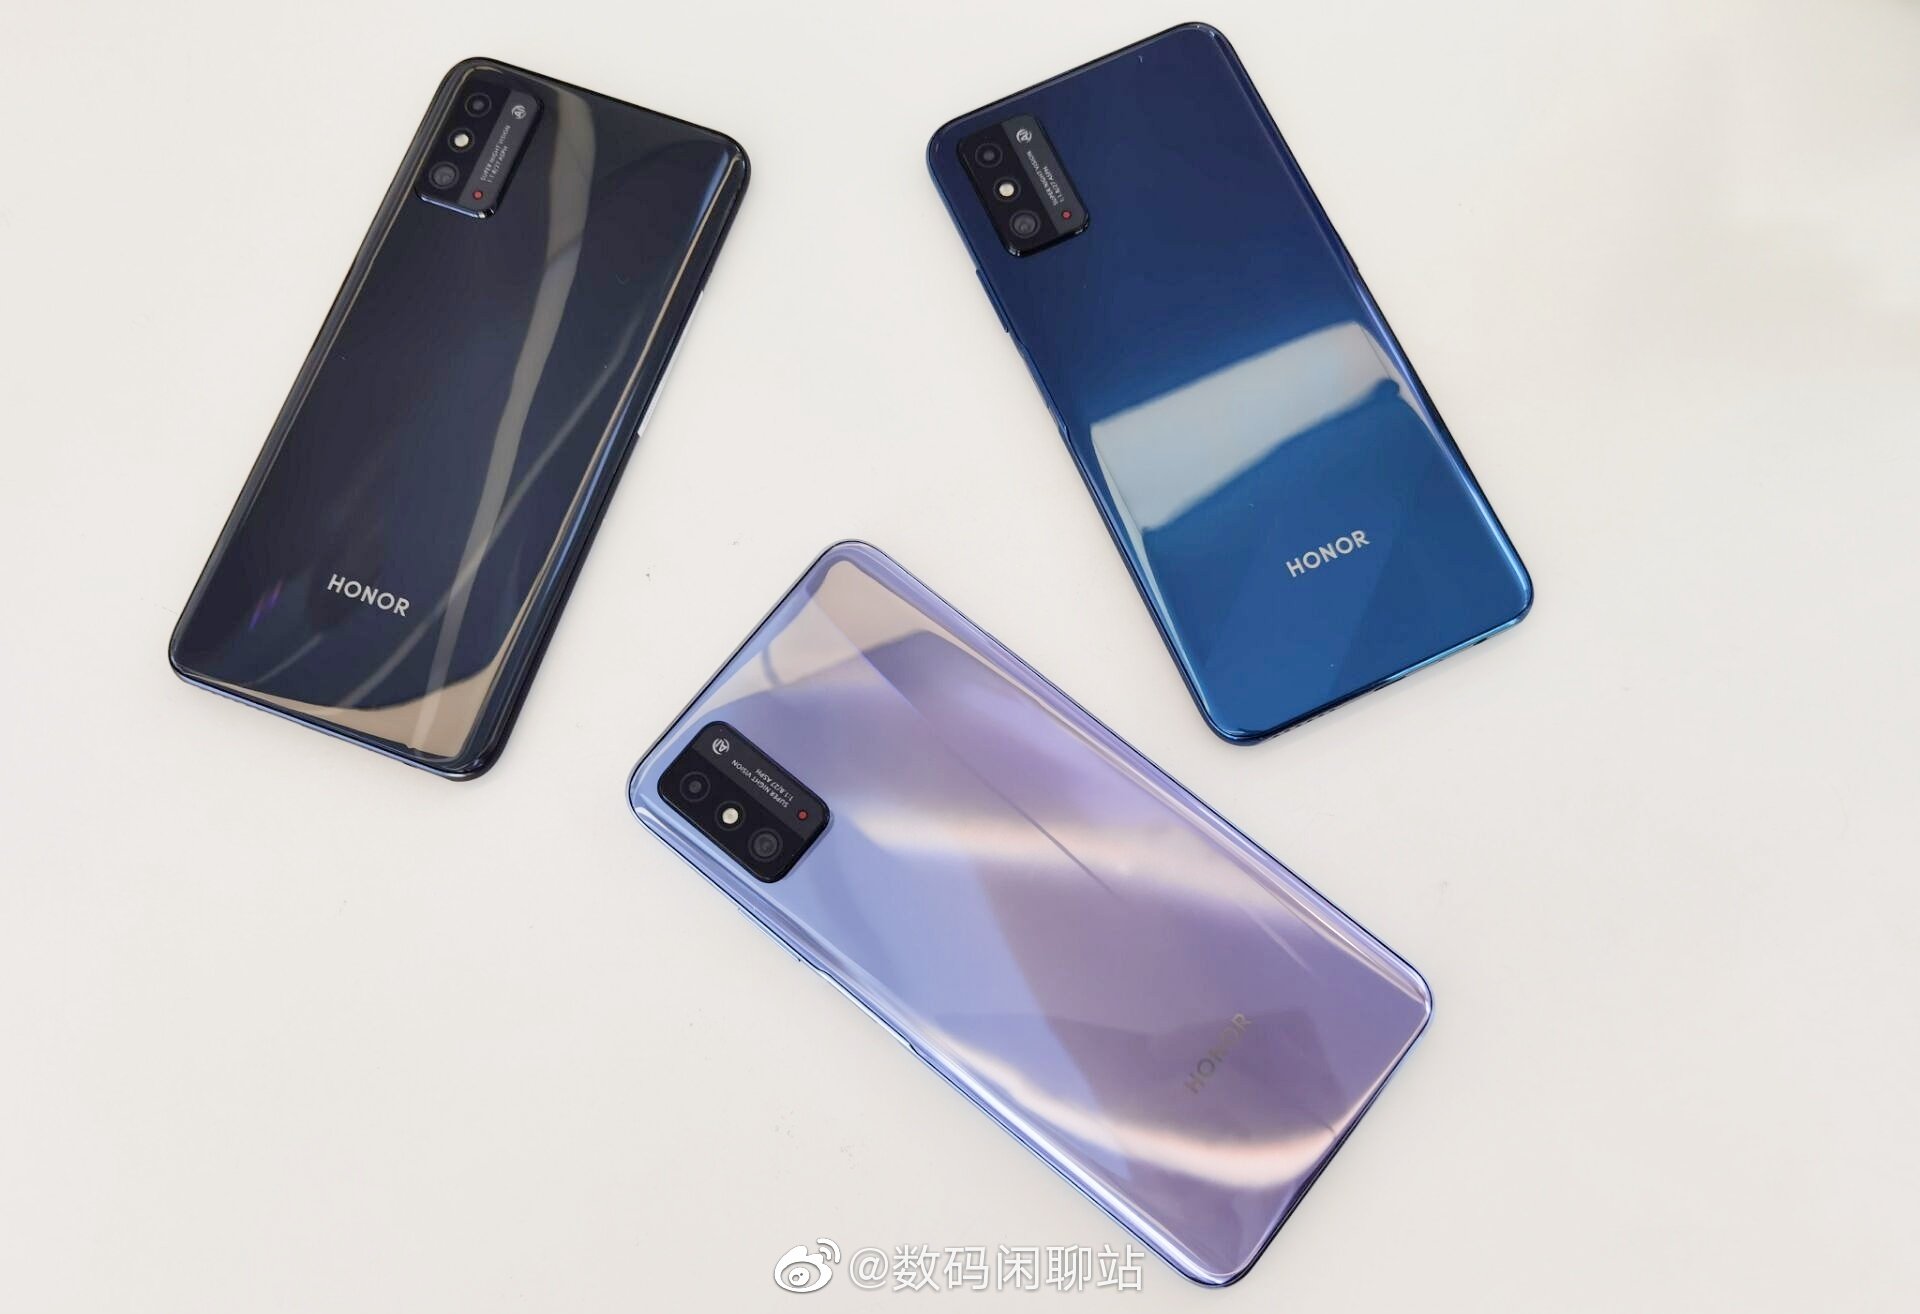 Honor X10 Max to house a large 5,000mAh battery in a thin 8.3mm body